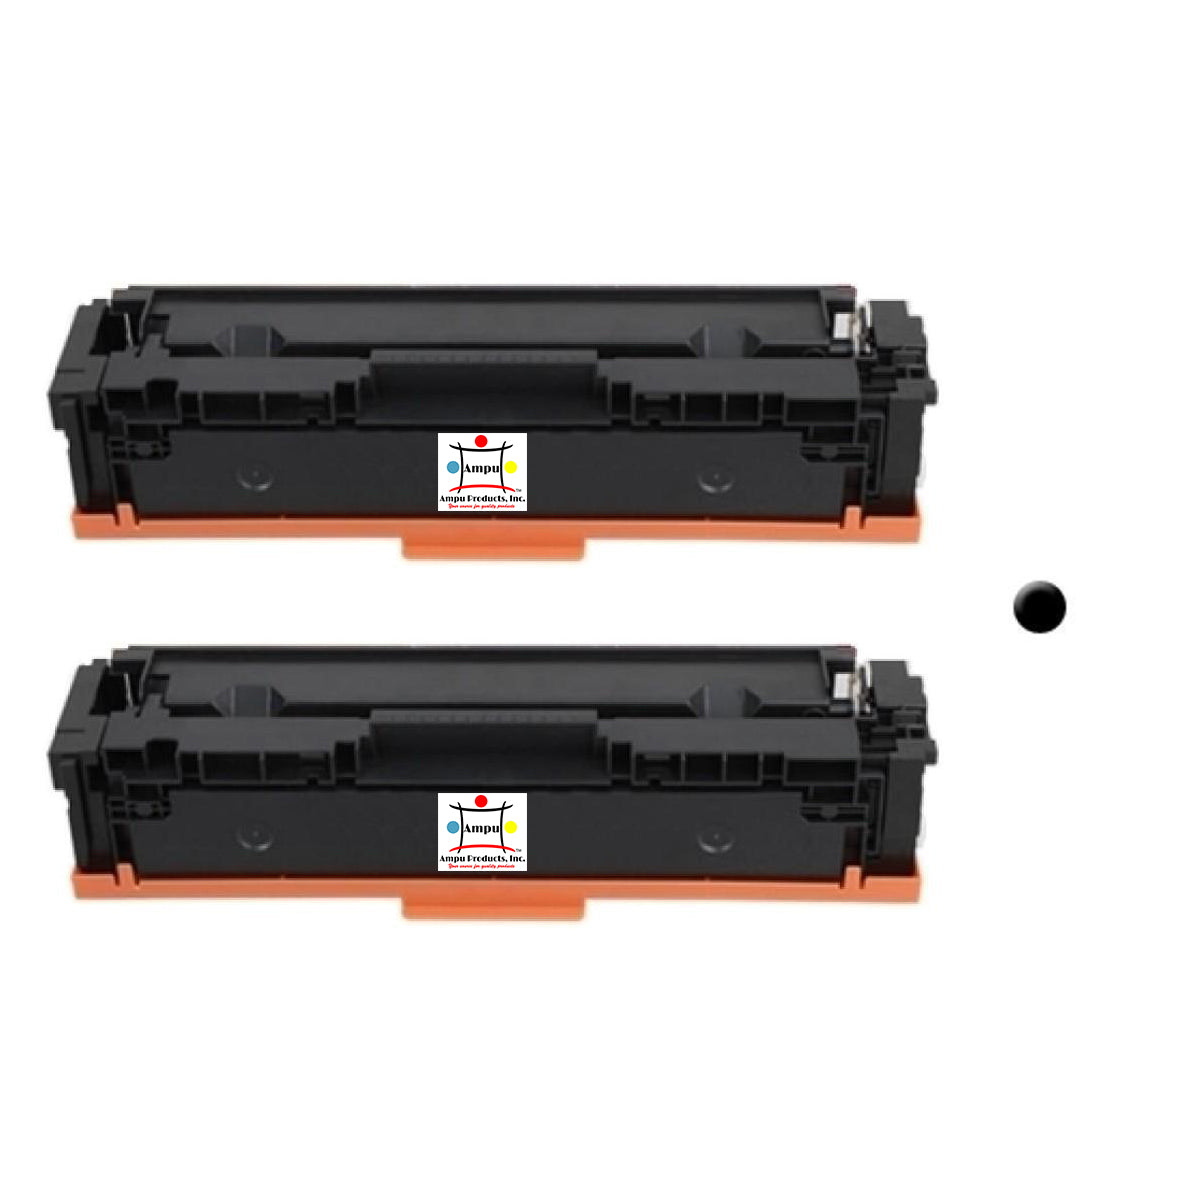 Ampuproducts Compatible Toner Cartridge Replacement For CANON 3016C001 (COMPATIBLE) TYPE 055 (2 PACK)